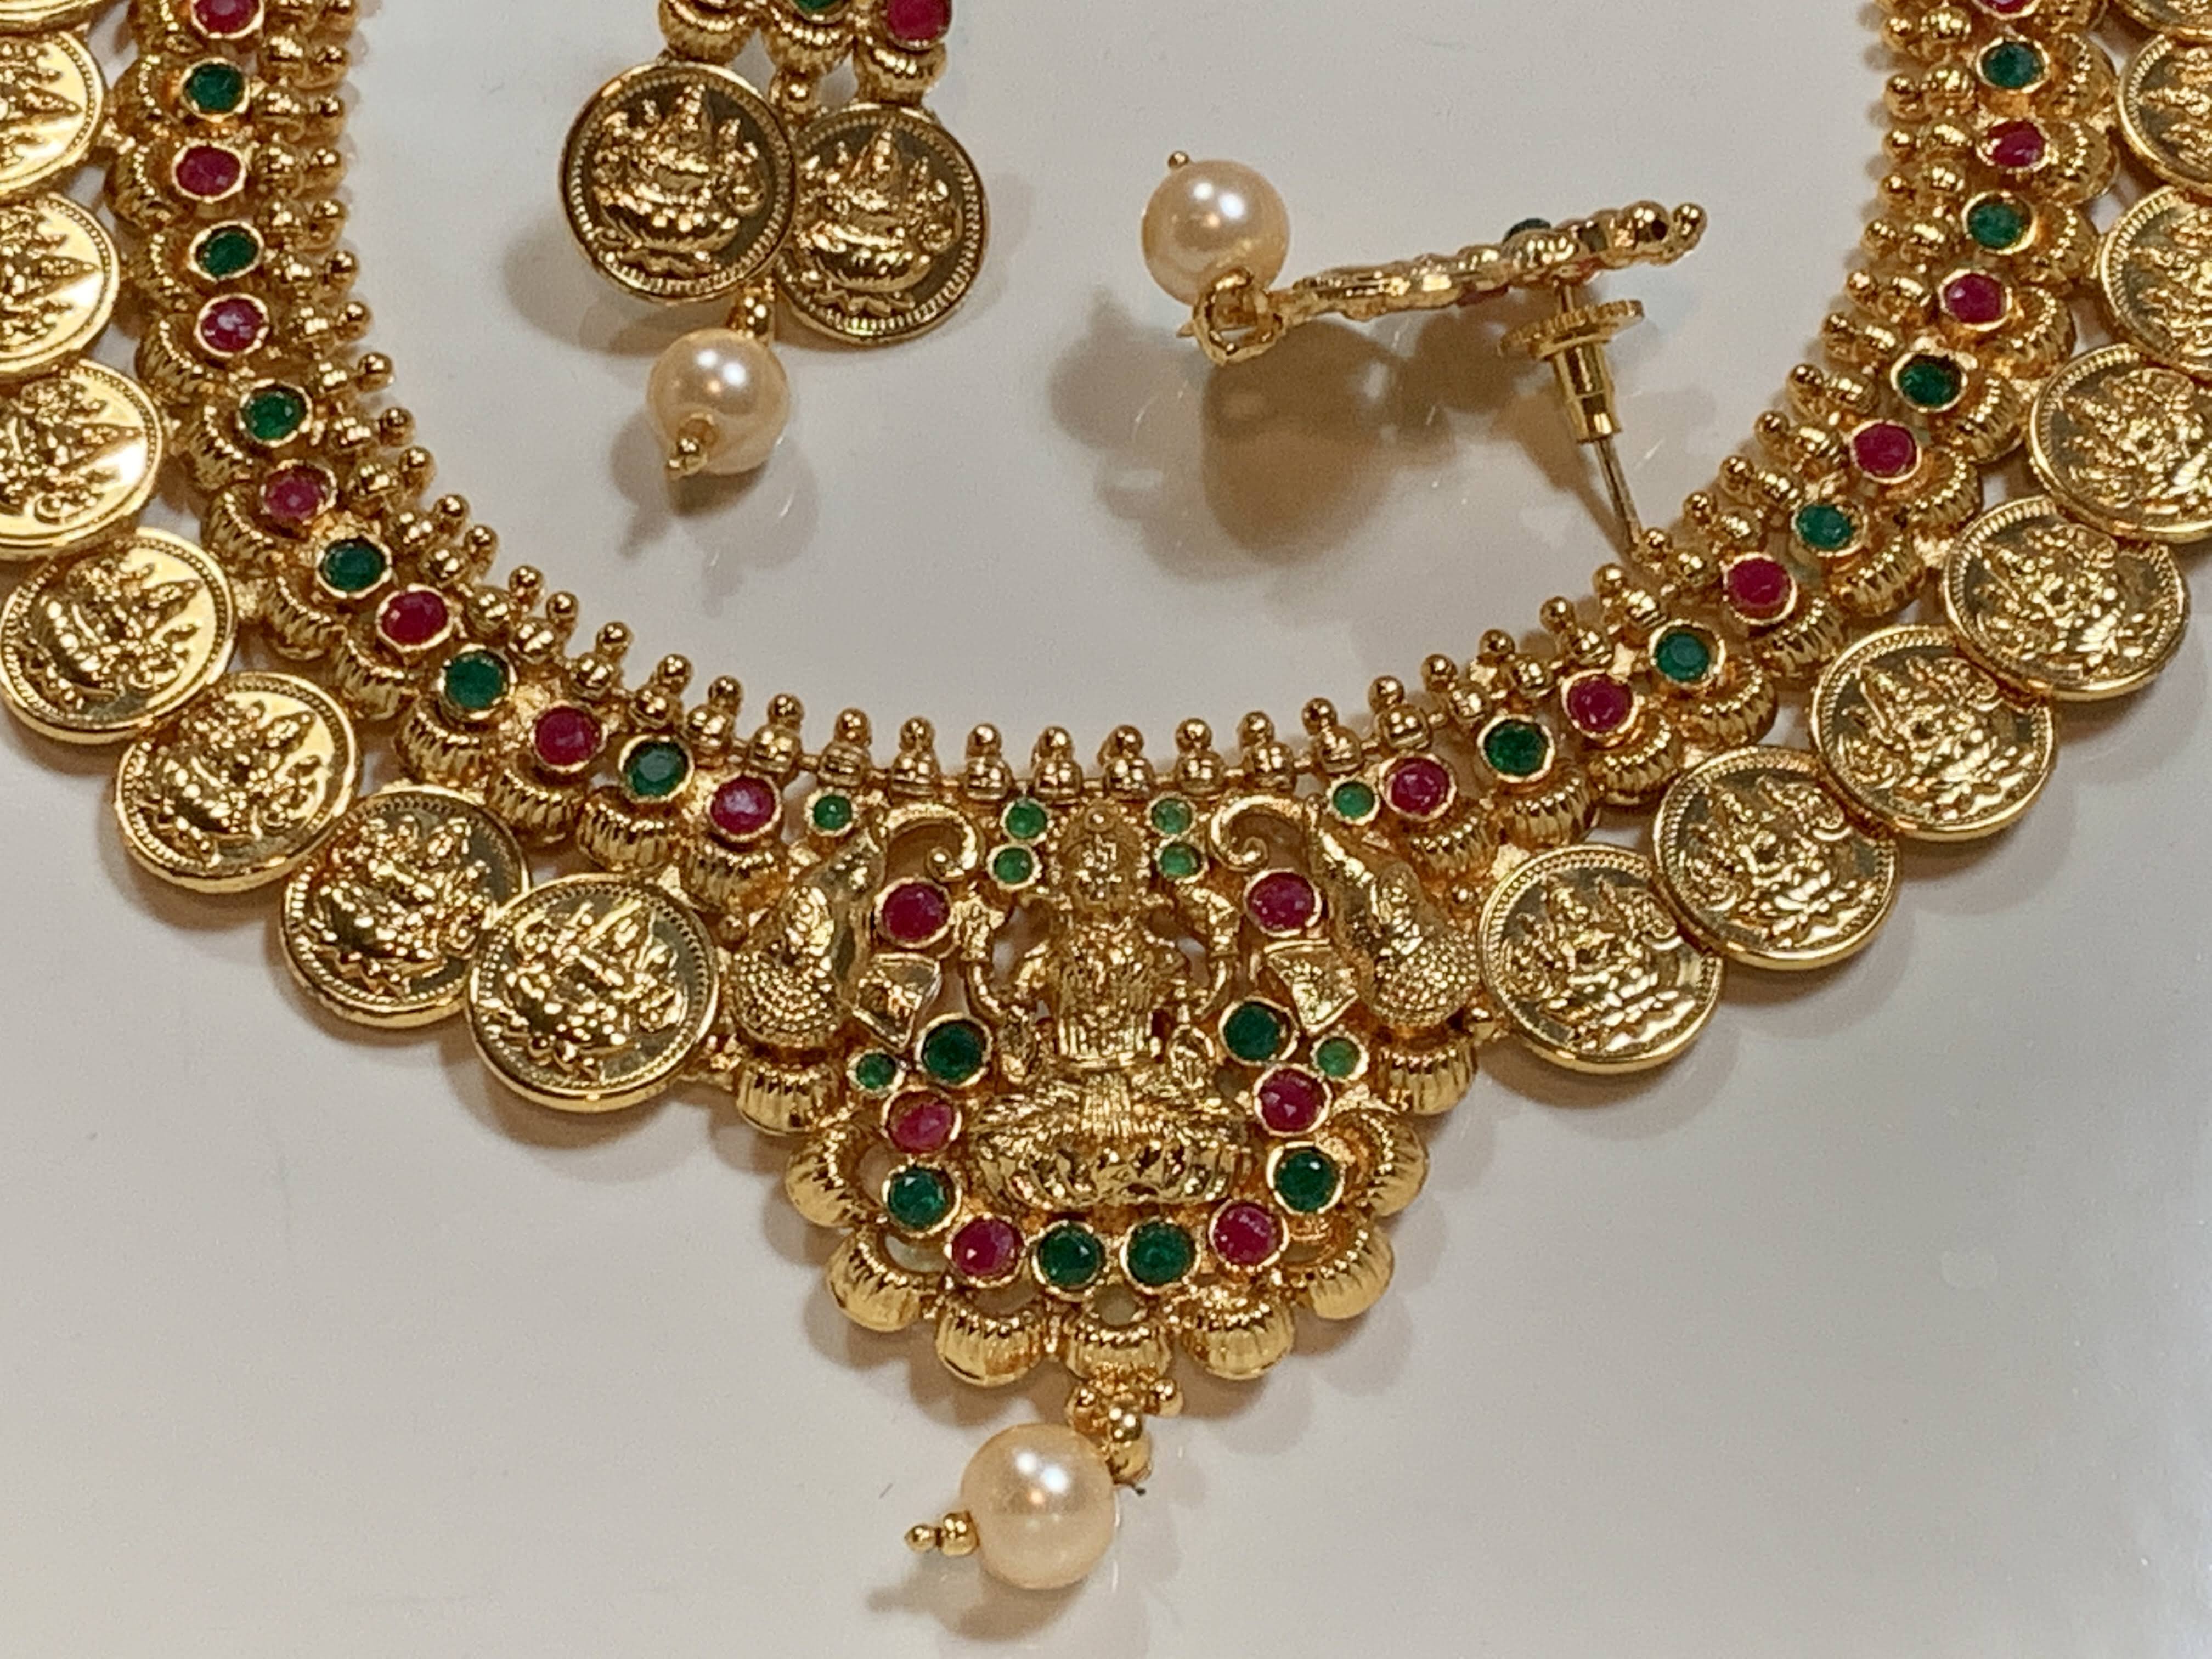 Goddess Lakshmi Pendant and Coins - Gold Plated Temple Jewelry - Pearl and Jewel Stone Studded Short Necklace Set